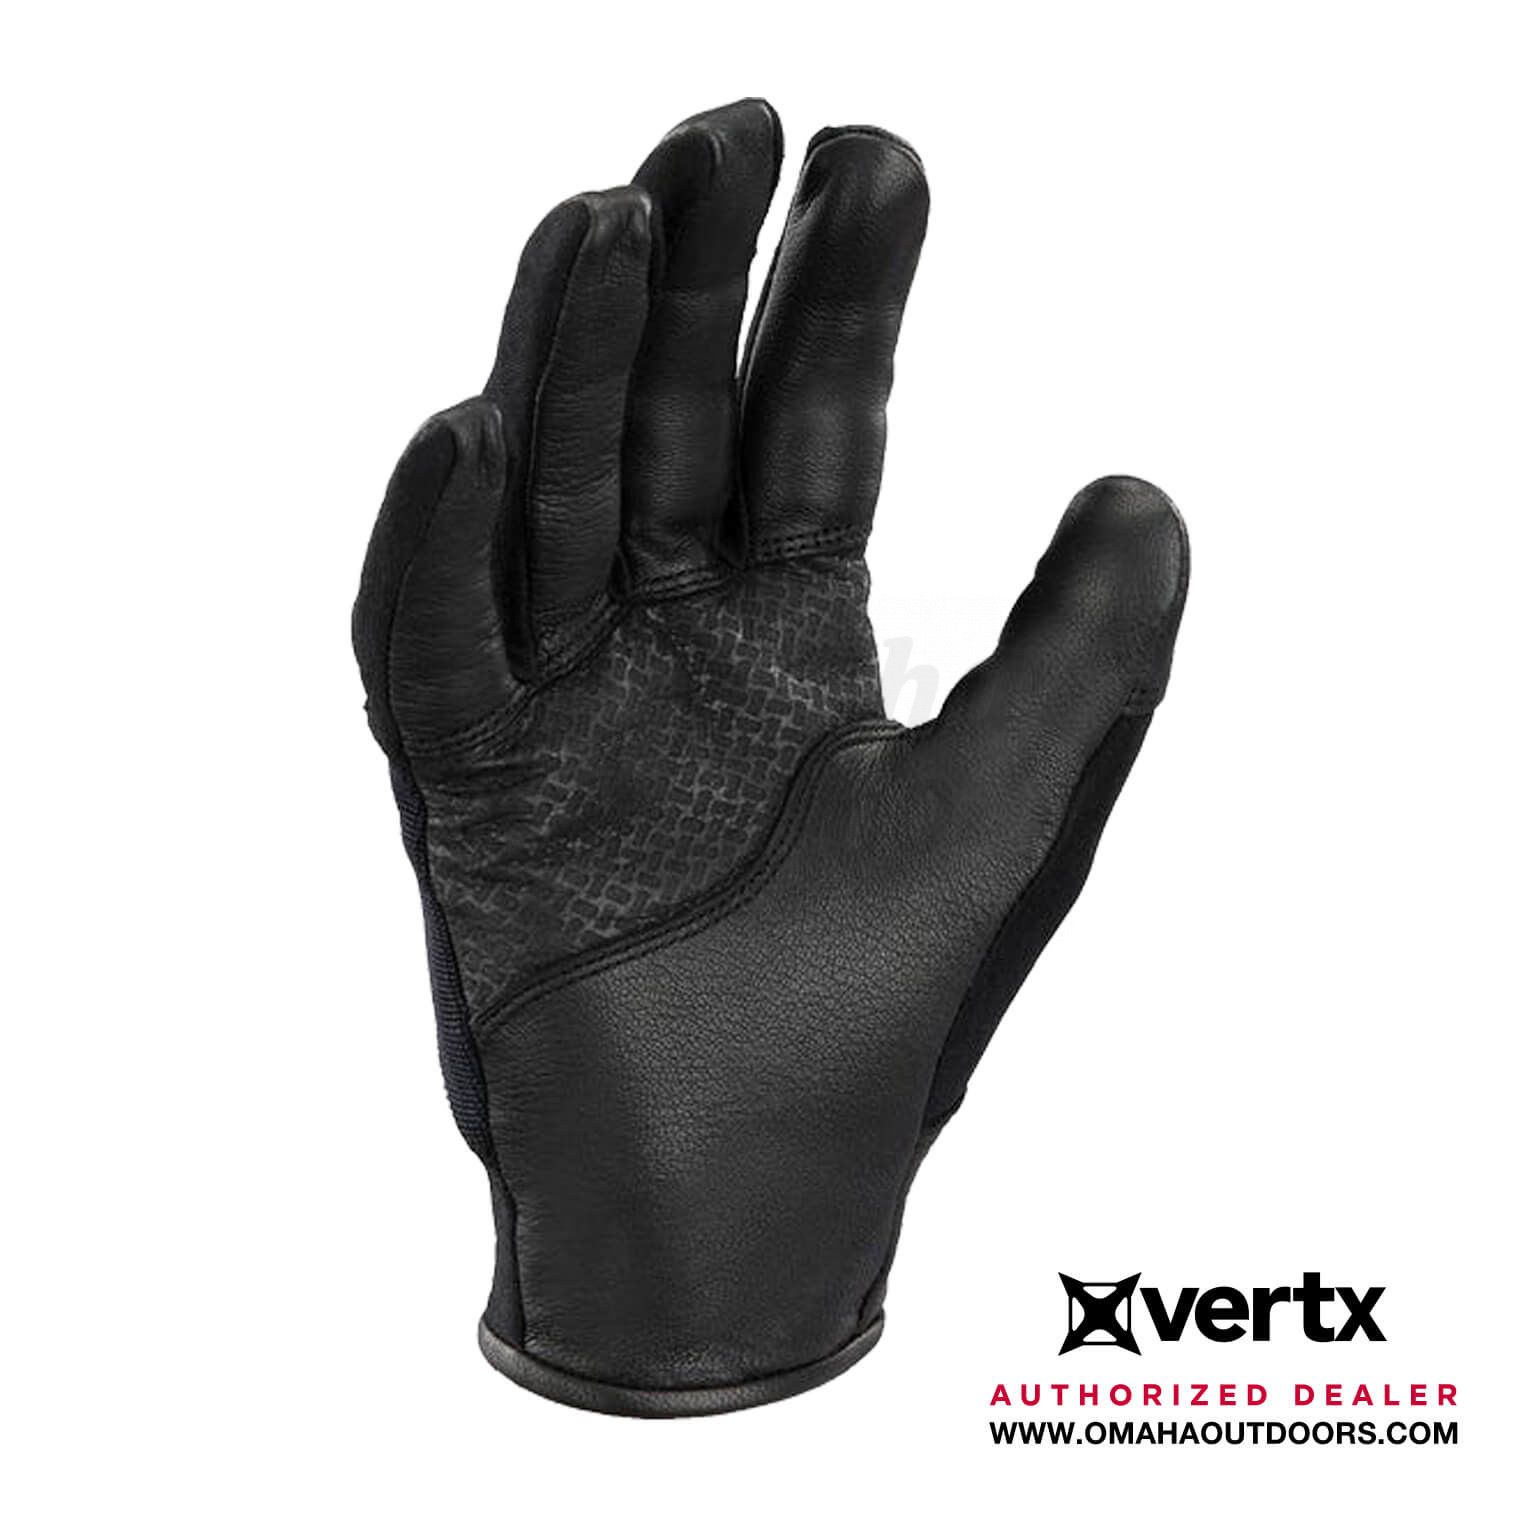 Vertx Move to Contact Glove It's Black